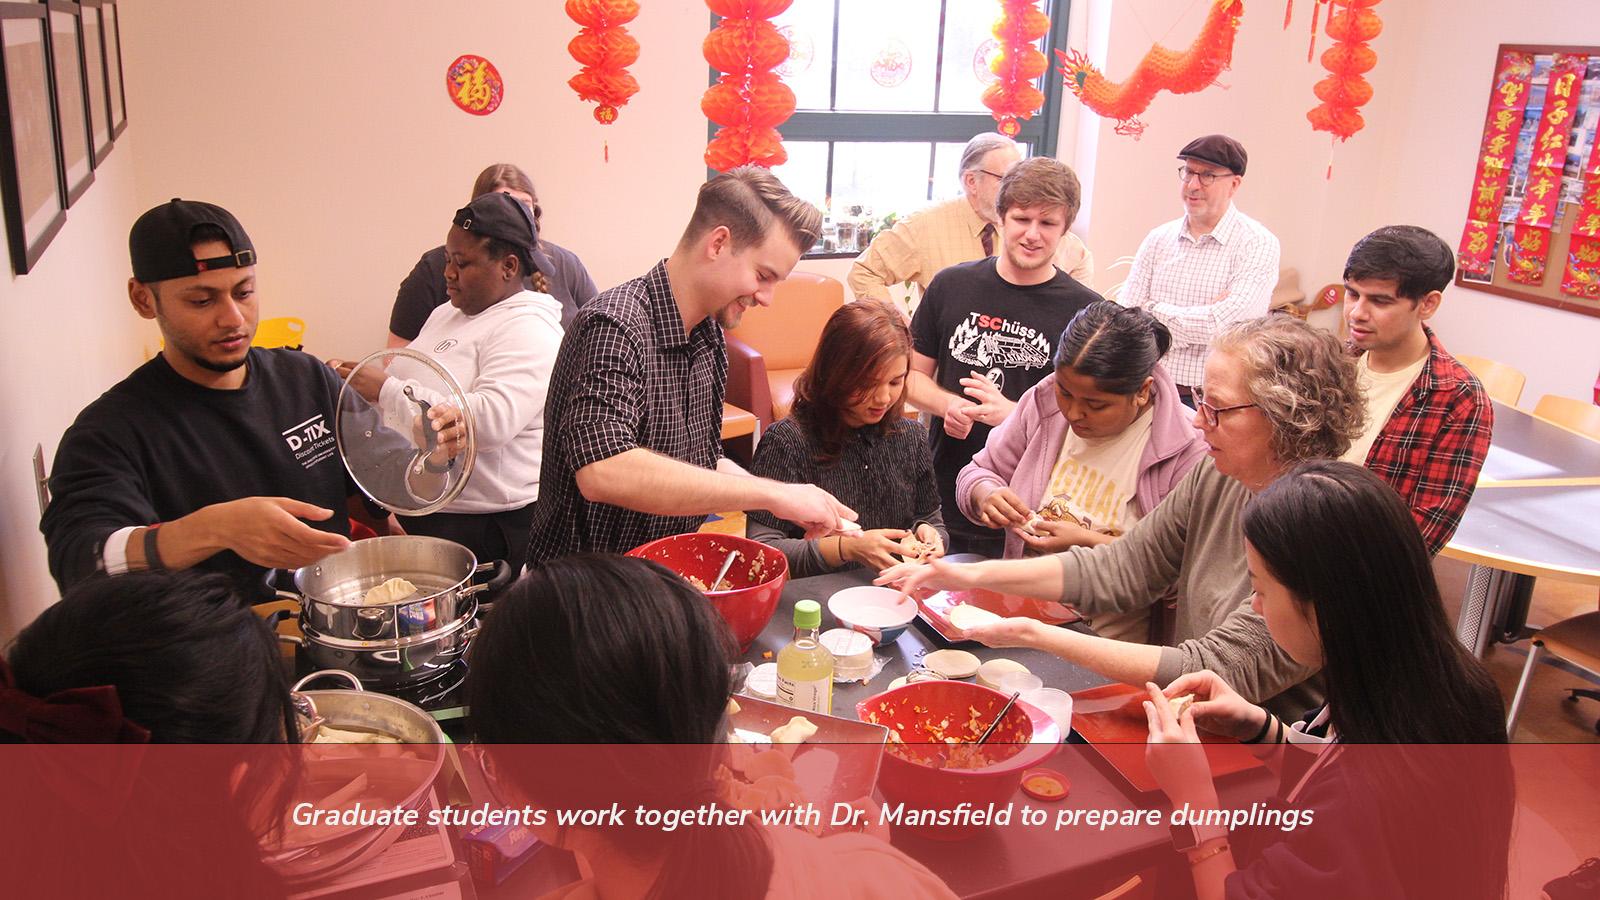 Graduate students work together with Dr. Mansfield to prepare dumplings